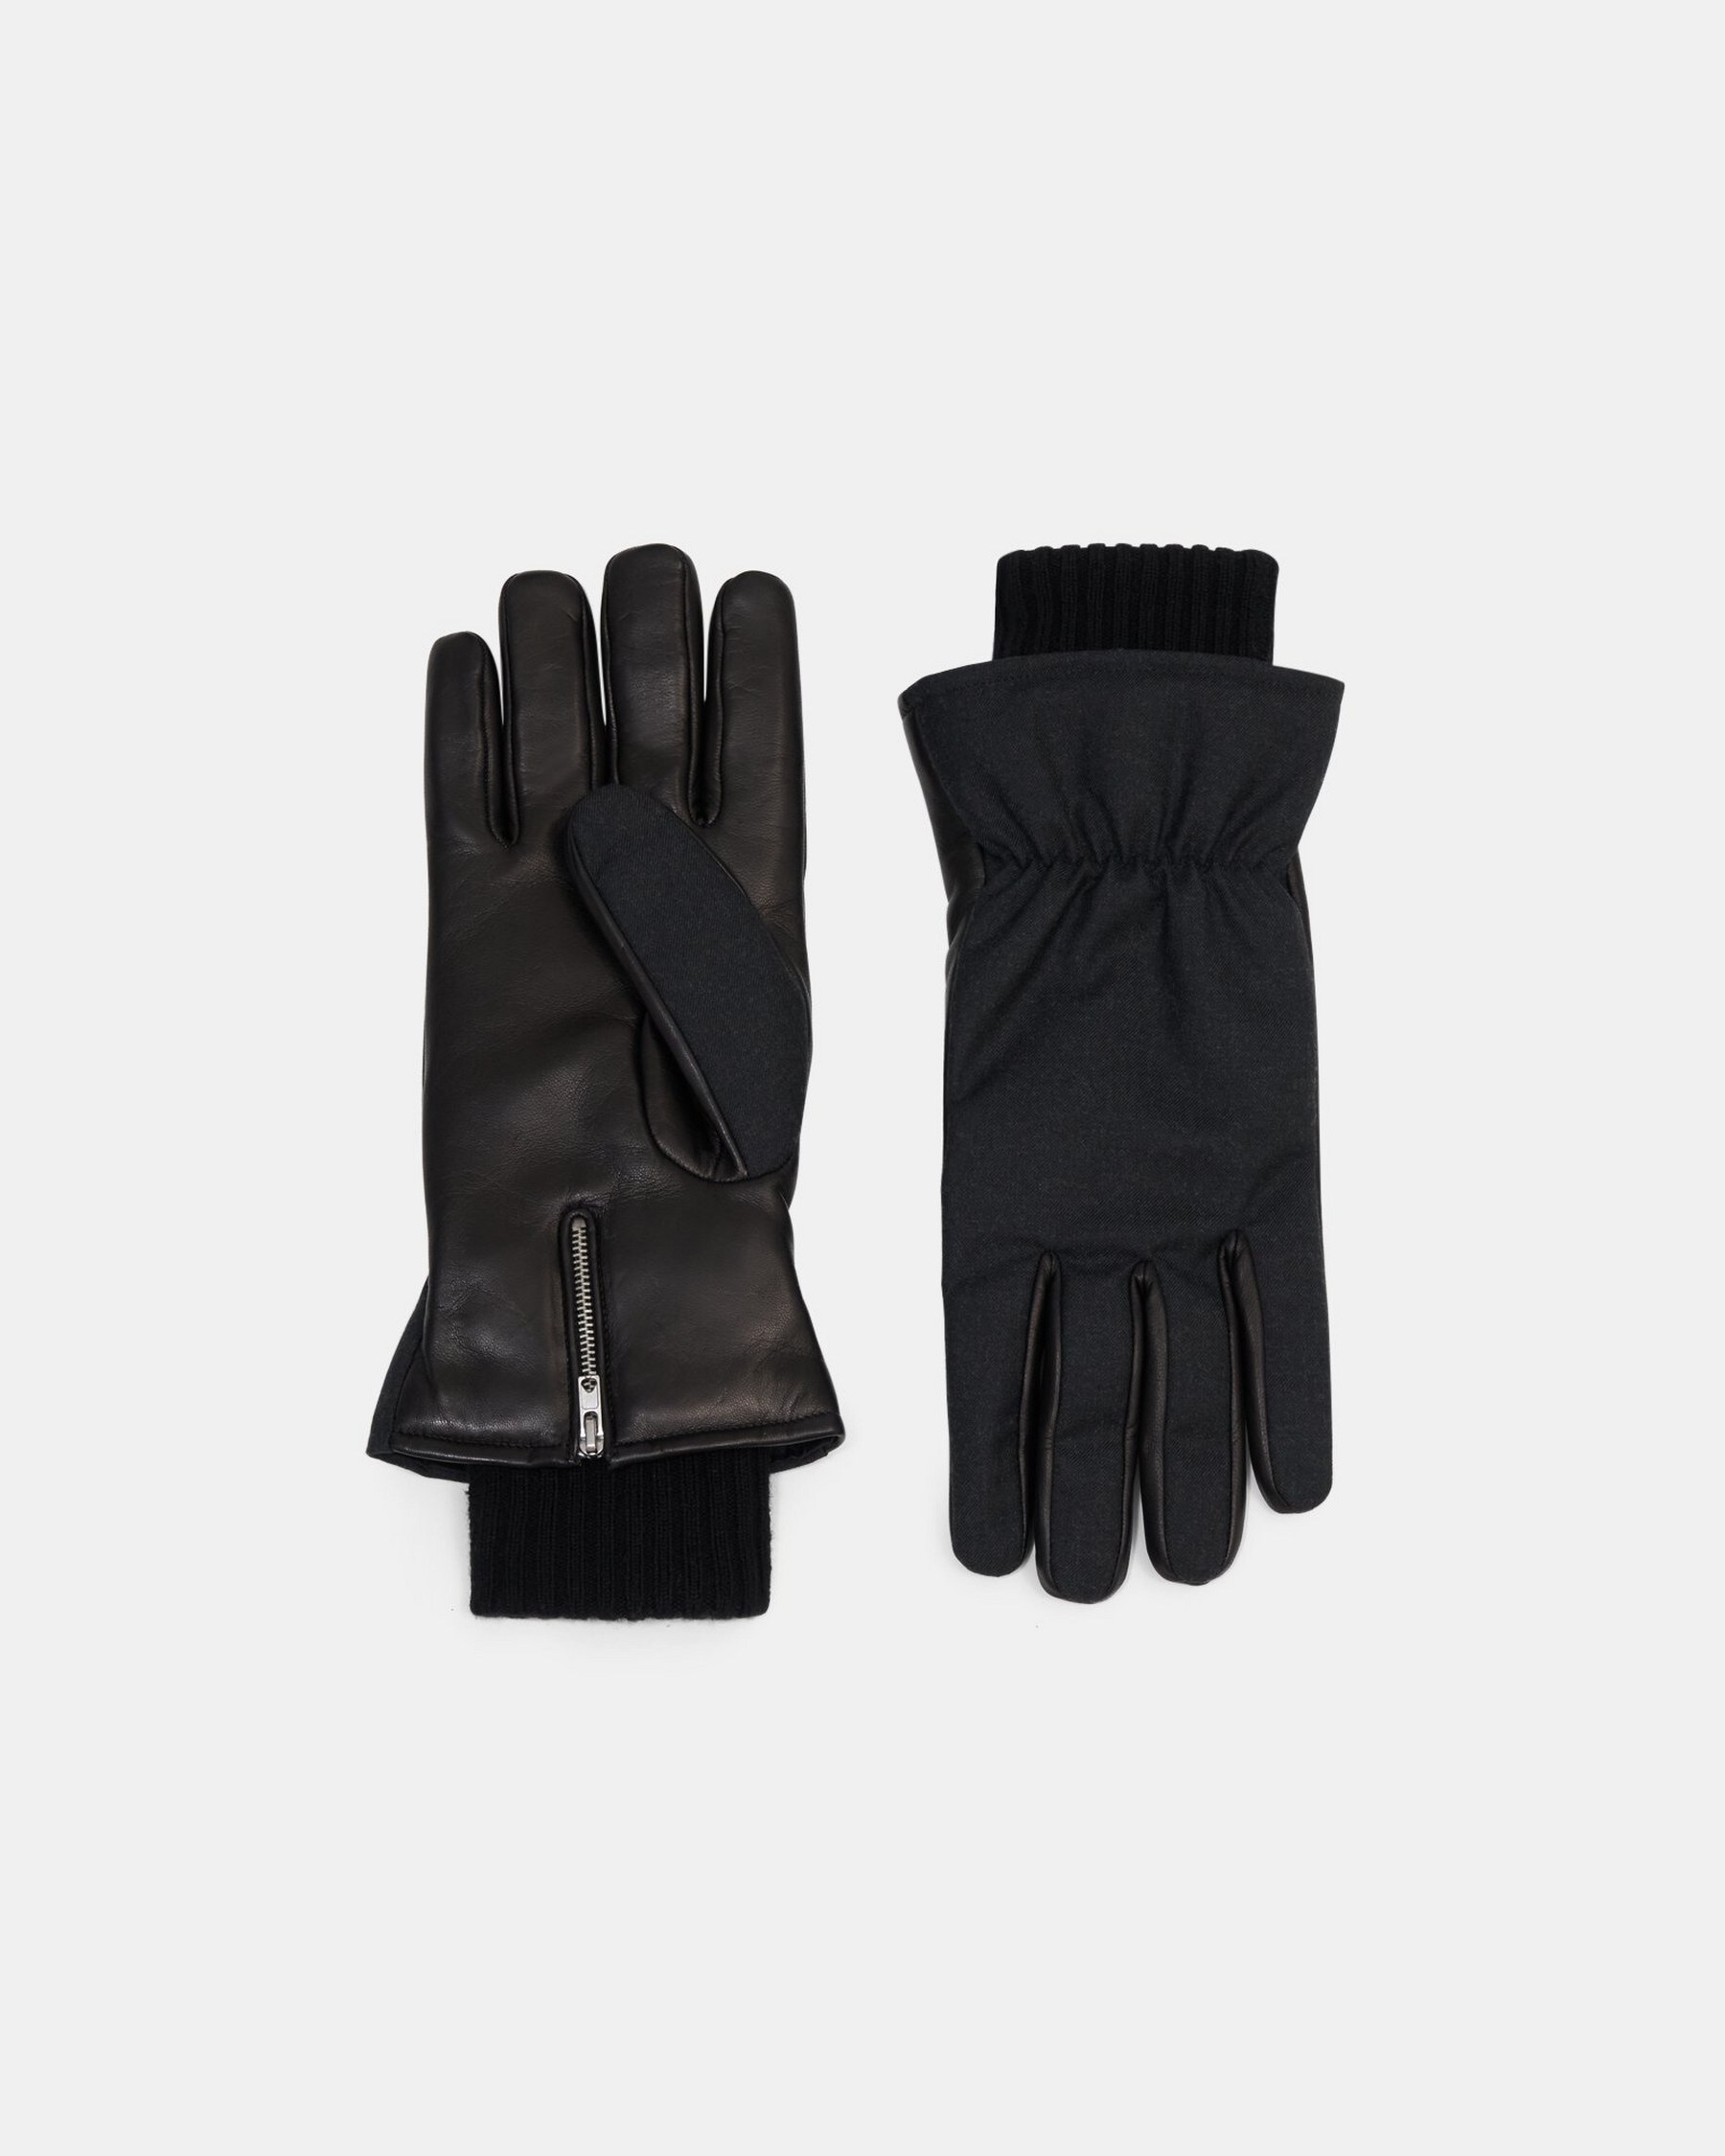 Real Leather Supple Gloves Riding Fashion Mittens 